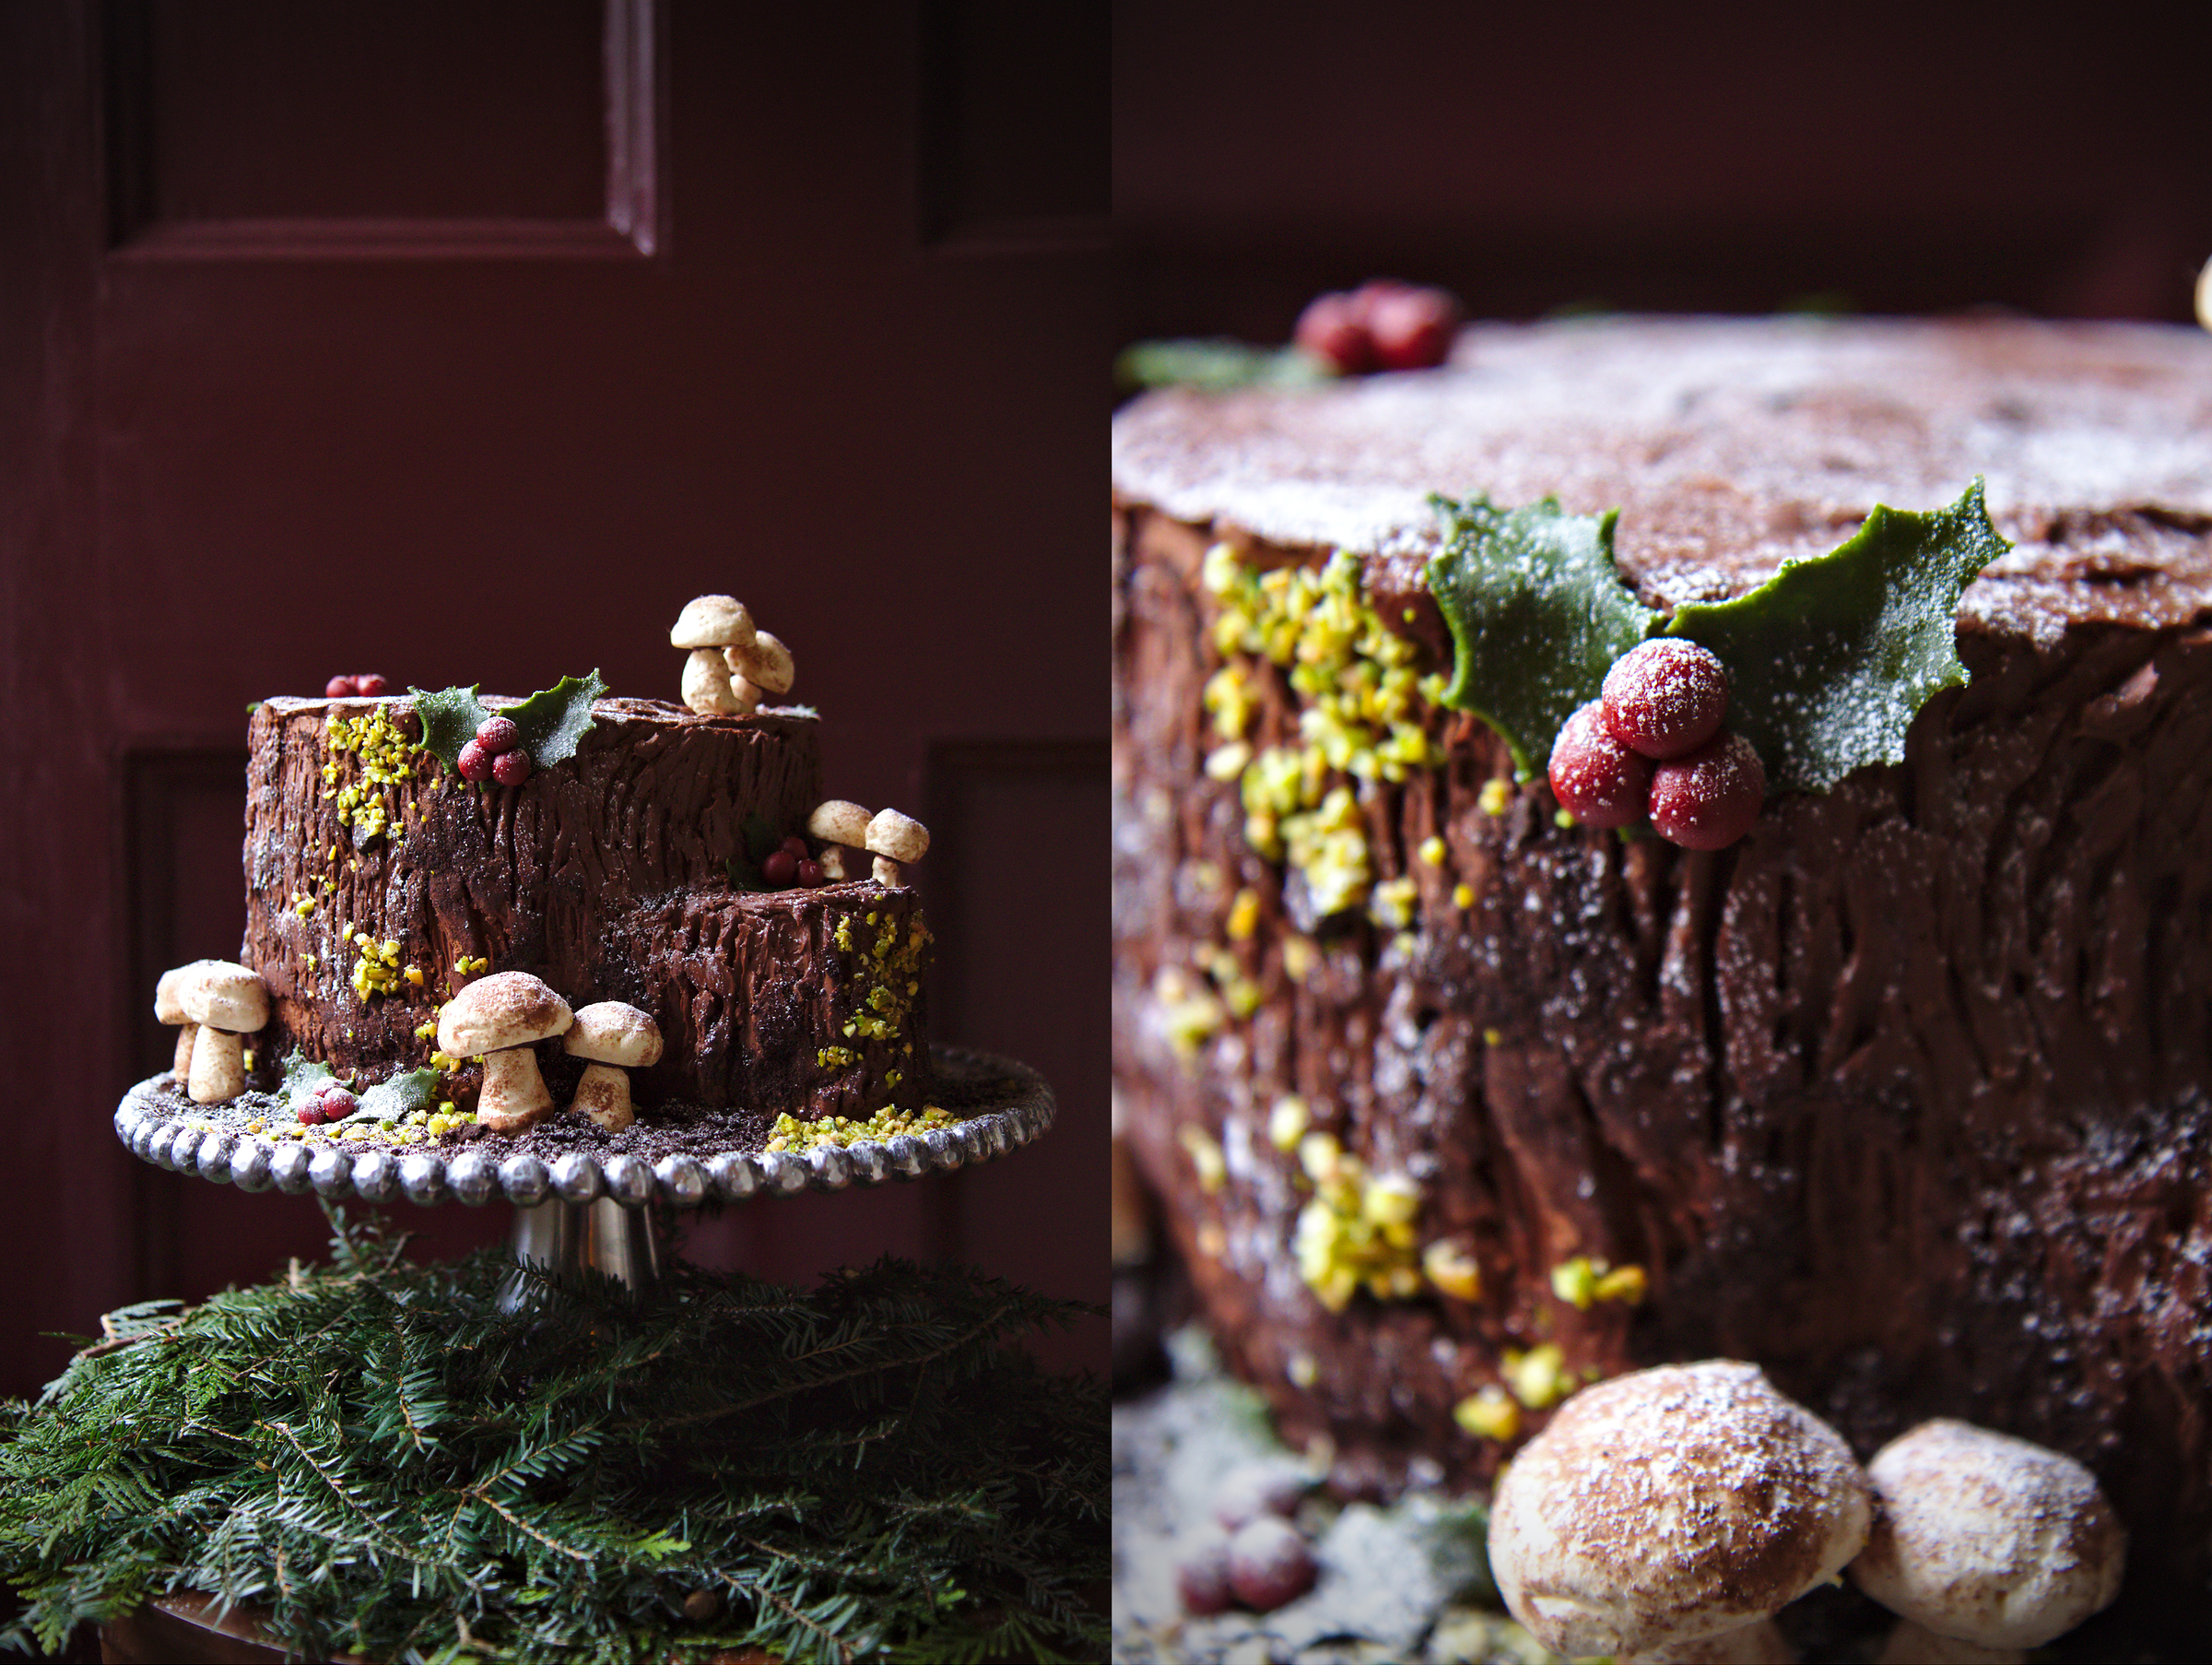 Buche De Noel: How To Make A Yule Log Cake For The Holidays - Just Crumbs  Blog By Suzie Durigon